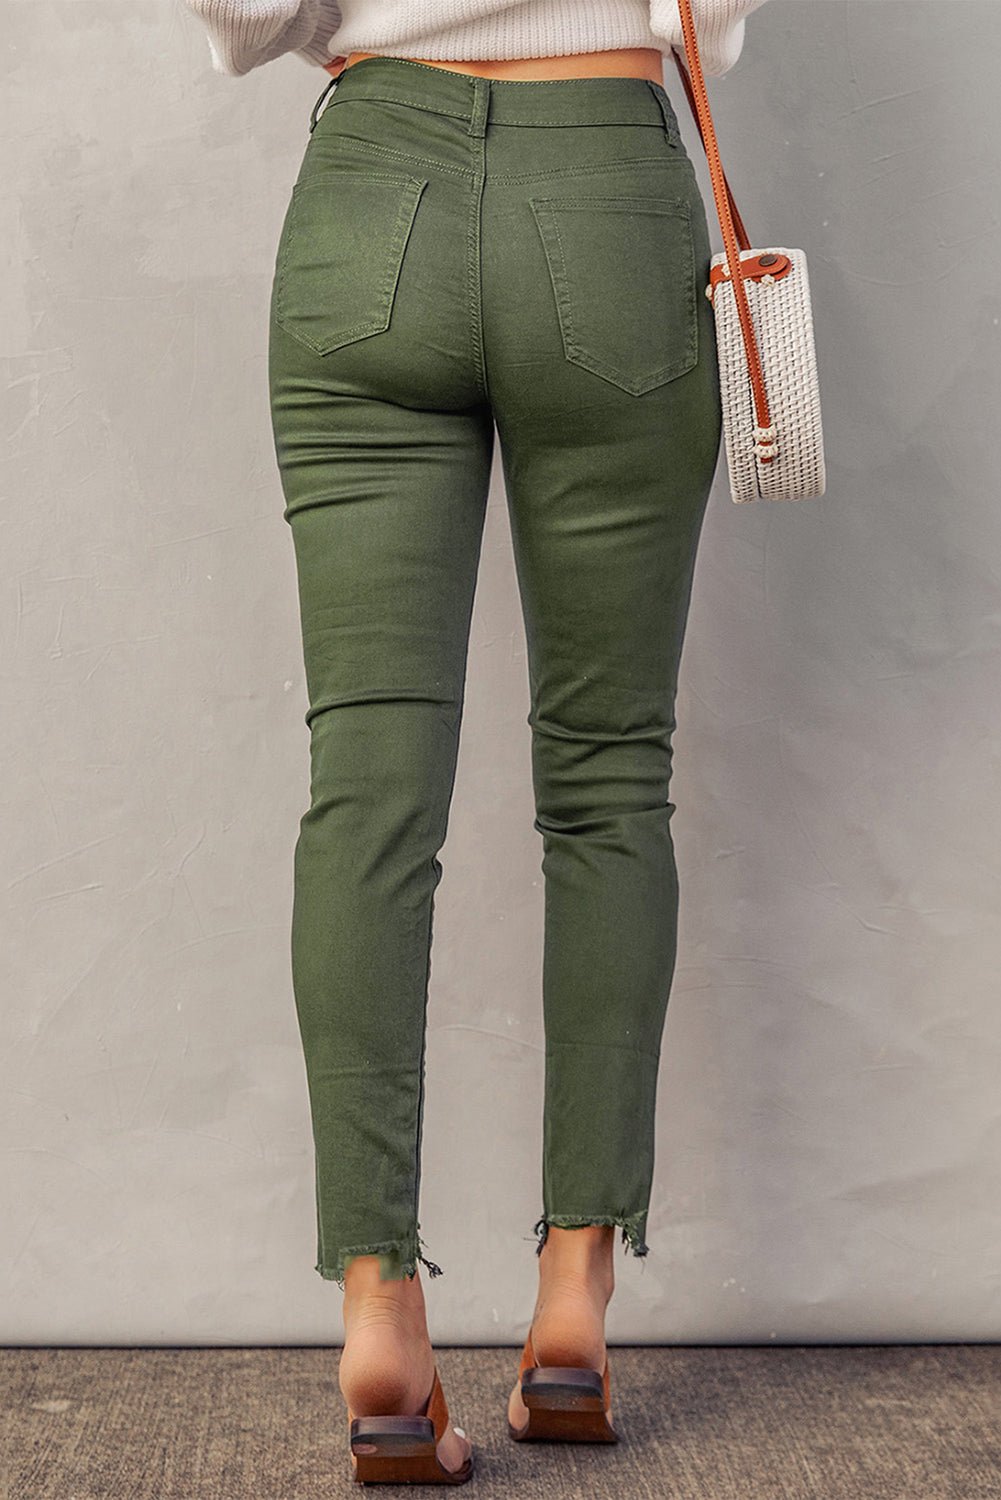 Baeful Button Fly Hem Detail Grey Skinny Jeans - Whimsical Appalachian Boutique